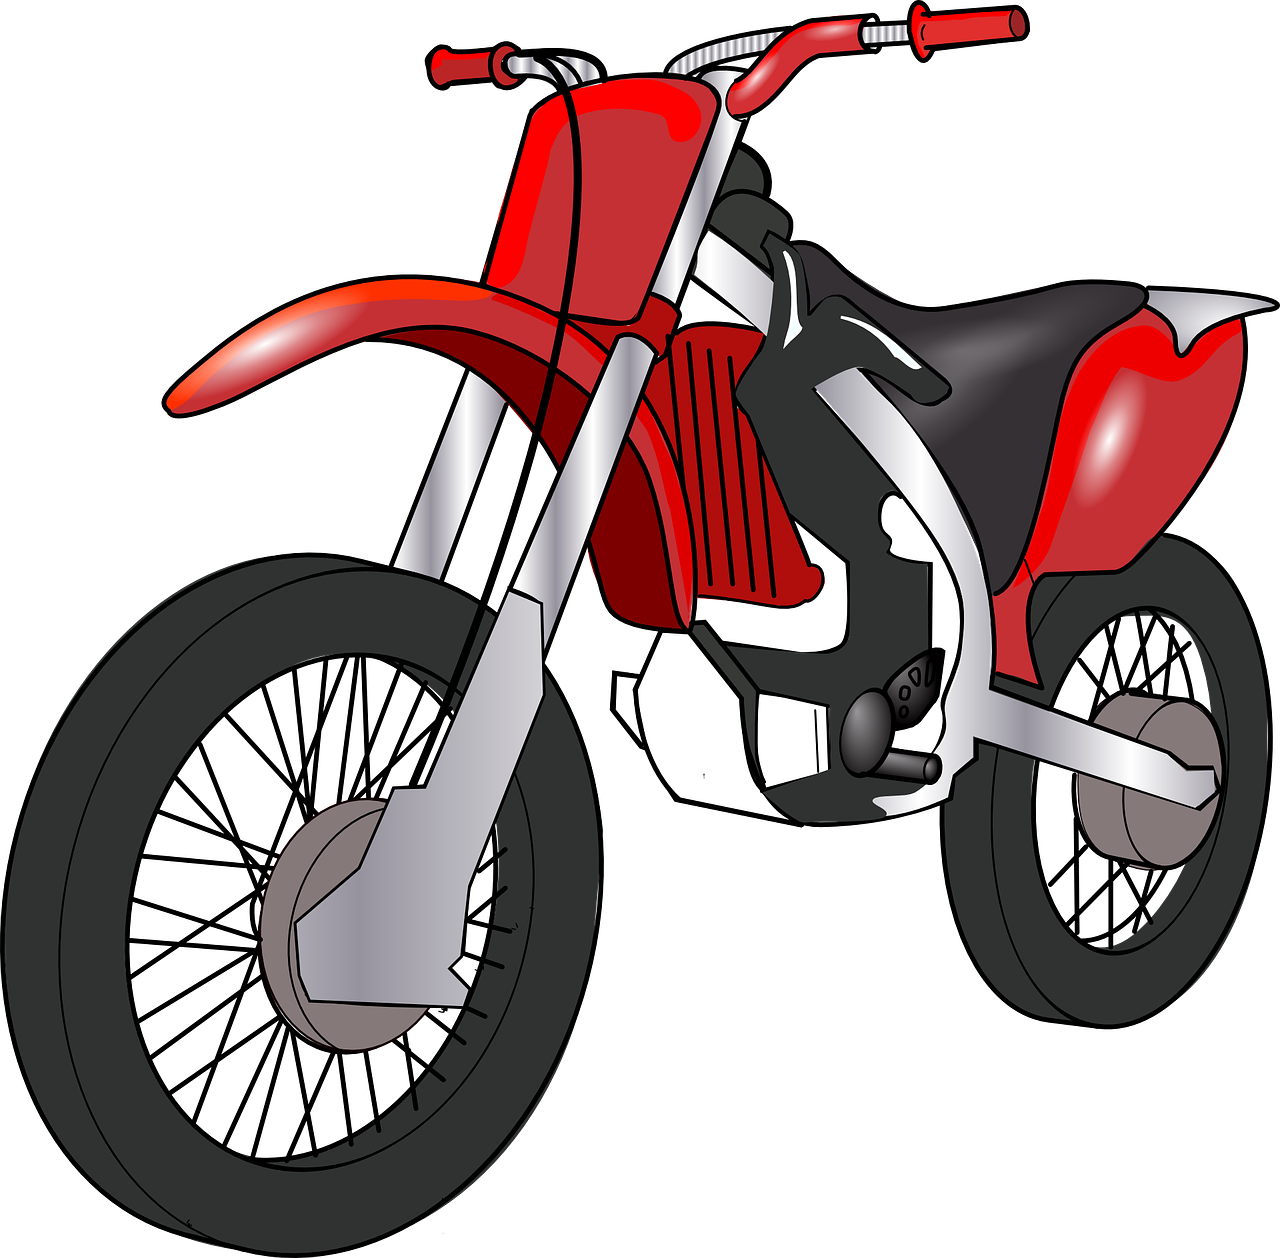 Motorcycle Harley Davidson Scooter Clip Art - Motorcycle Clipart (1280x1258)